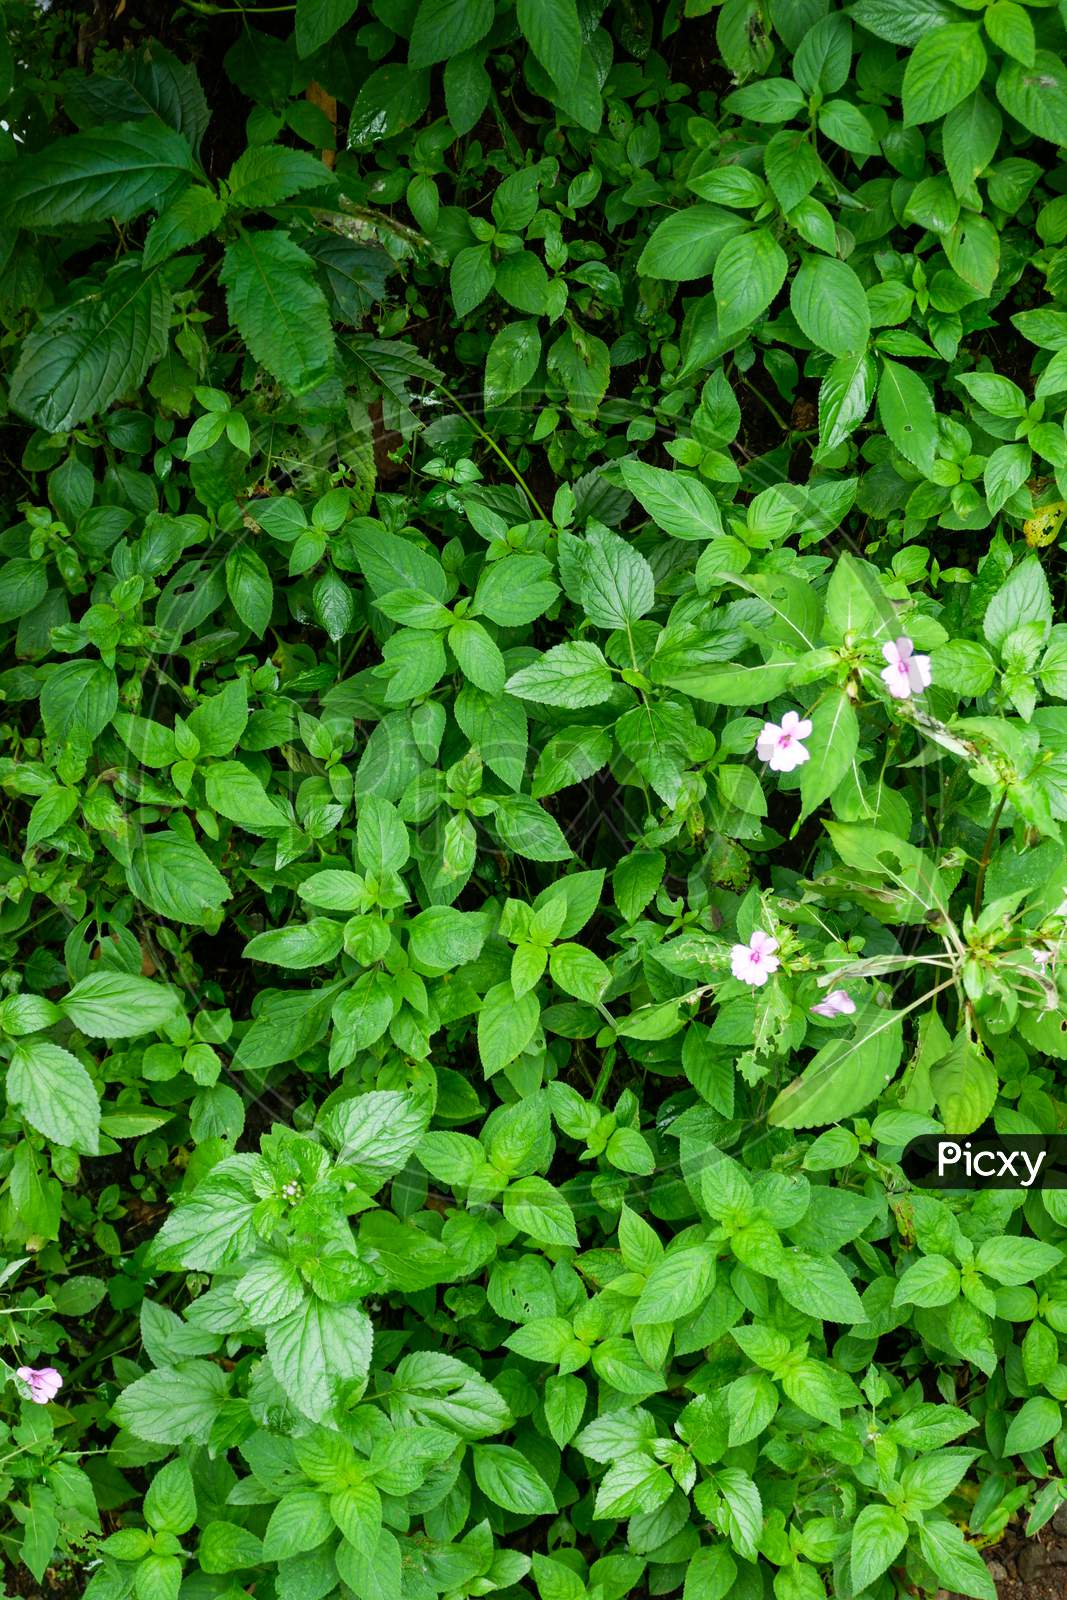 The Photo Is A Photo Of Wild Plants I Took In The Forest Near My House.